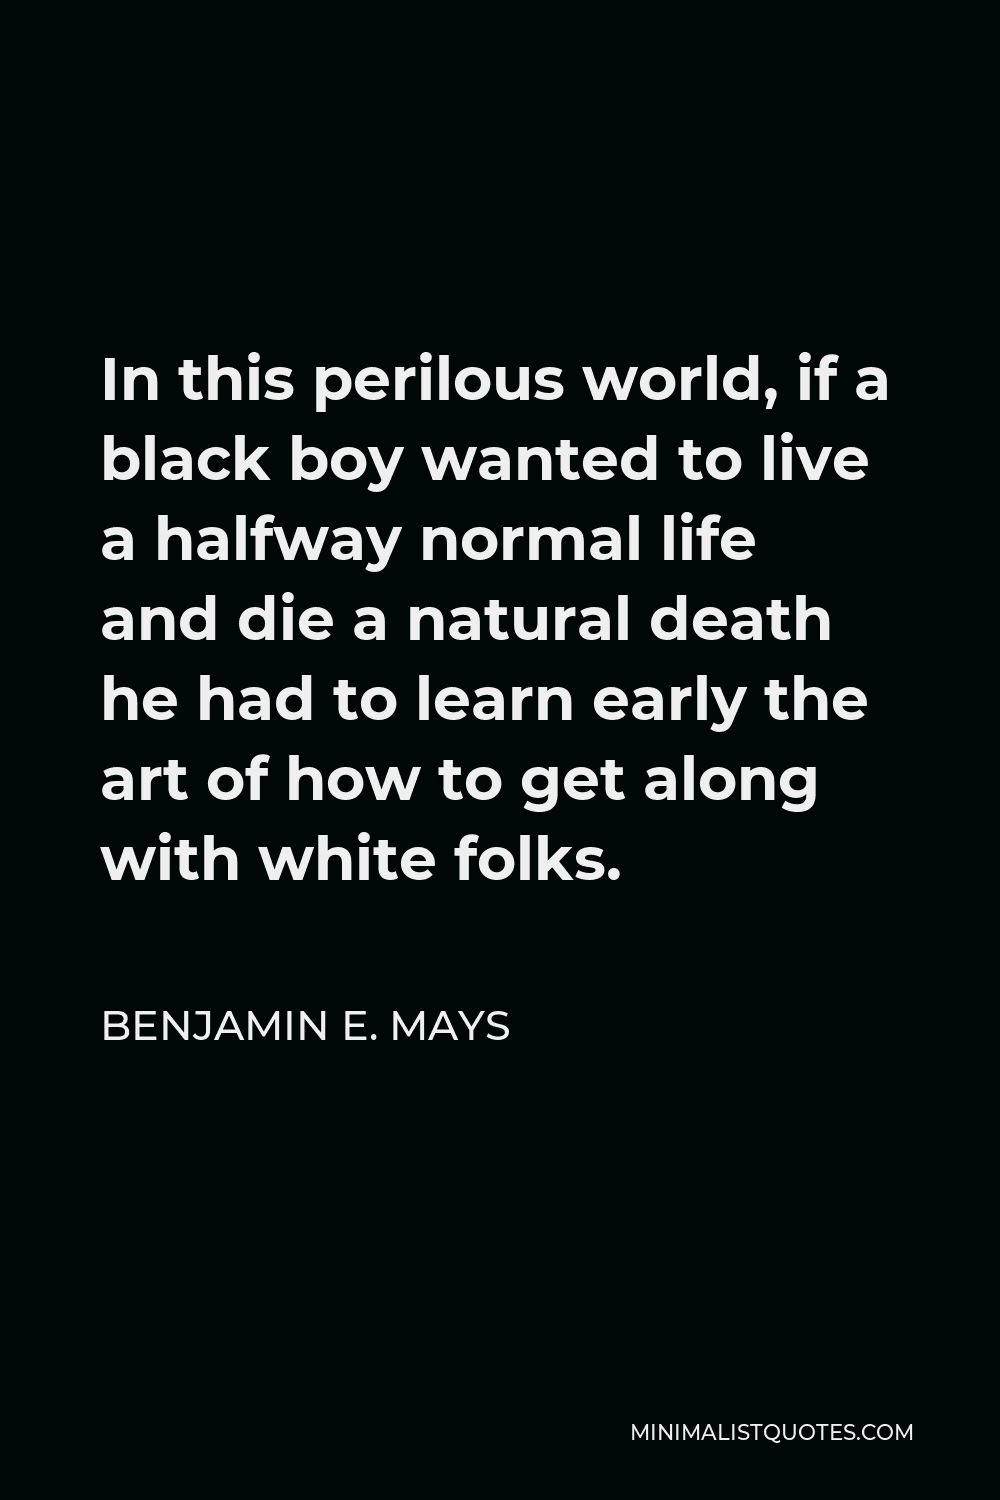 Benjamin E. Mays Quote - In this perilous world, if a black boy wanted to live a halfway normal life and die a natural death he had to learn early the art of how to get along with white folks.